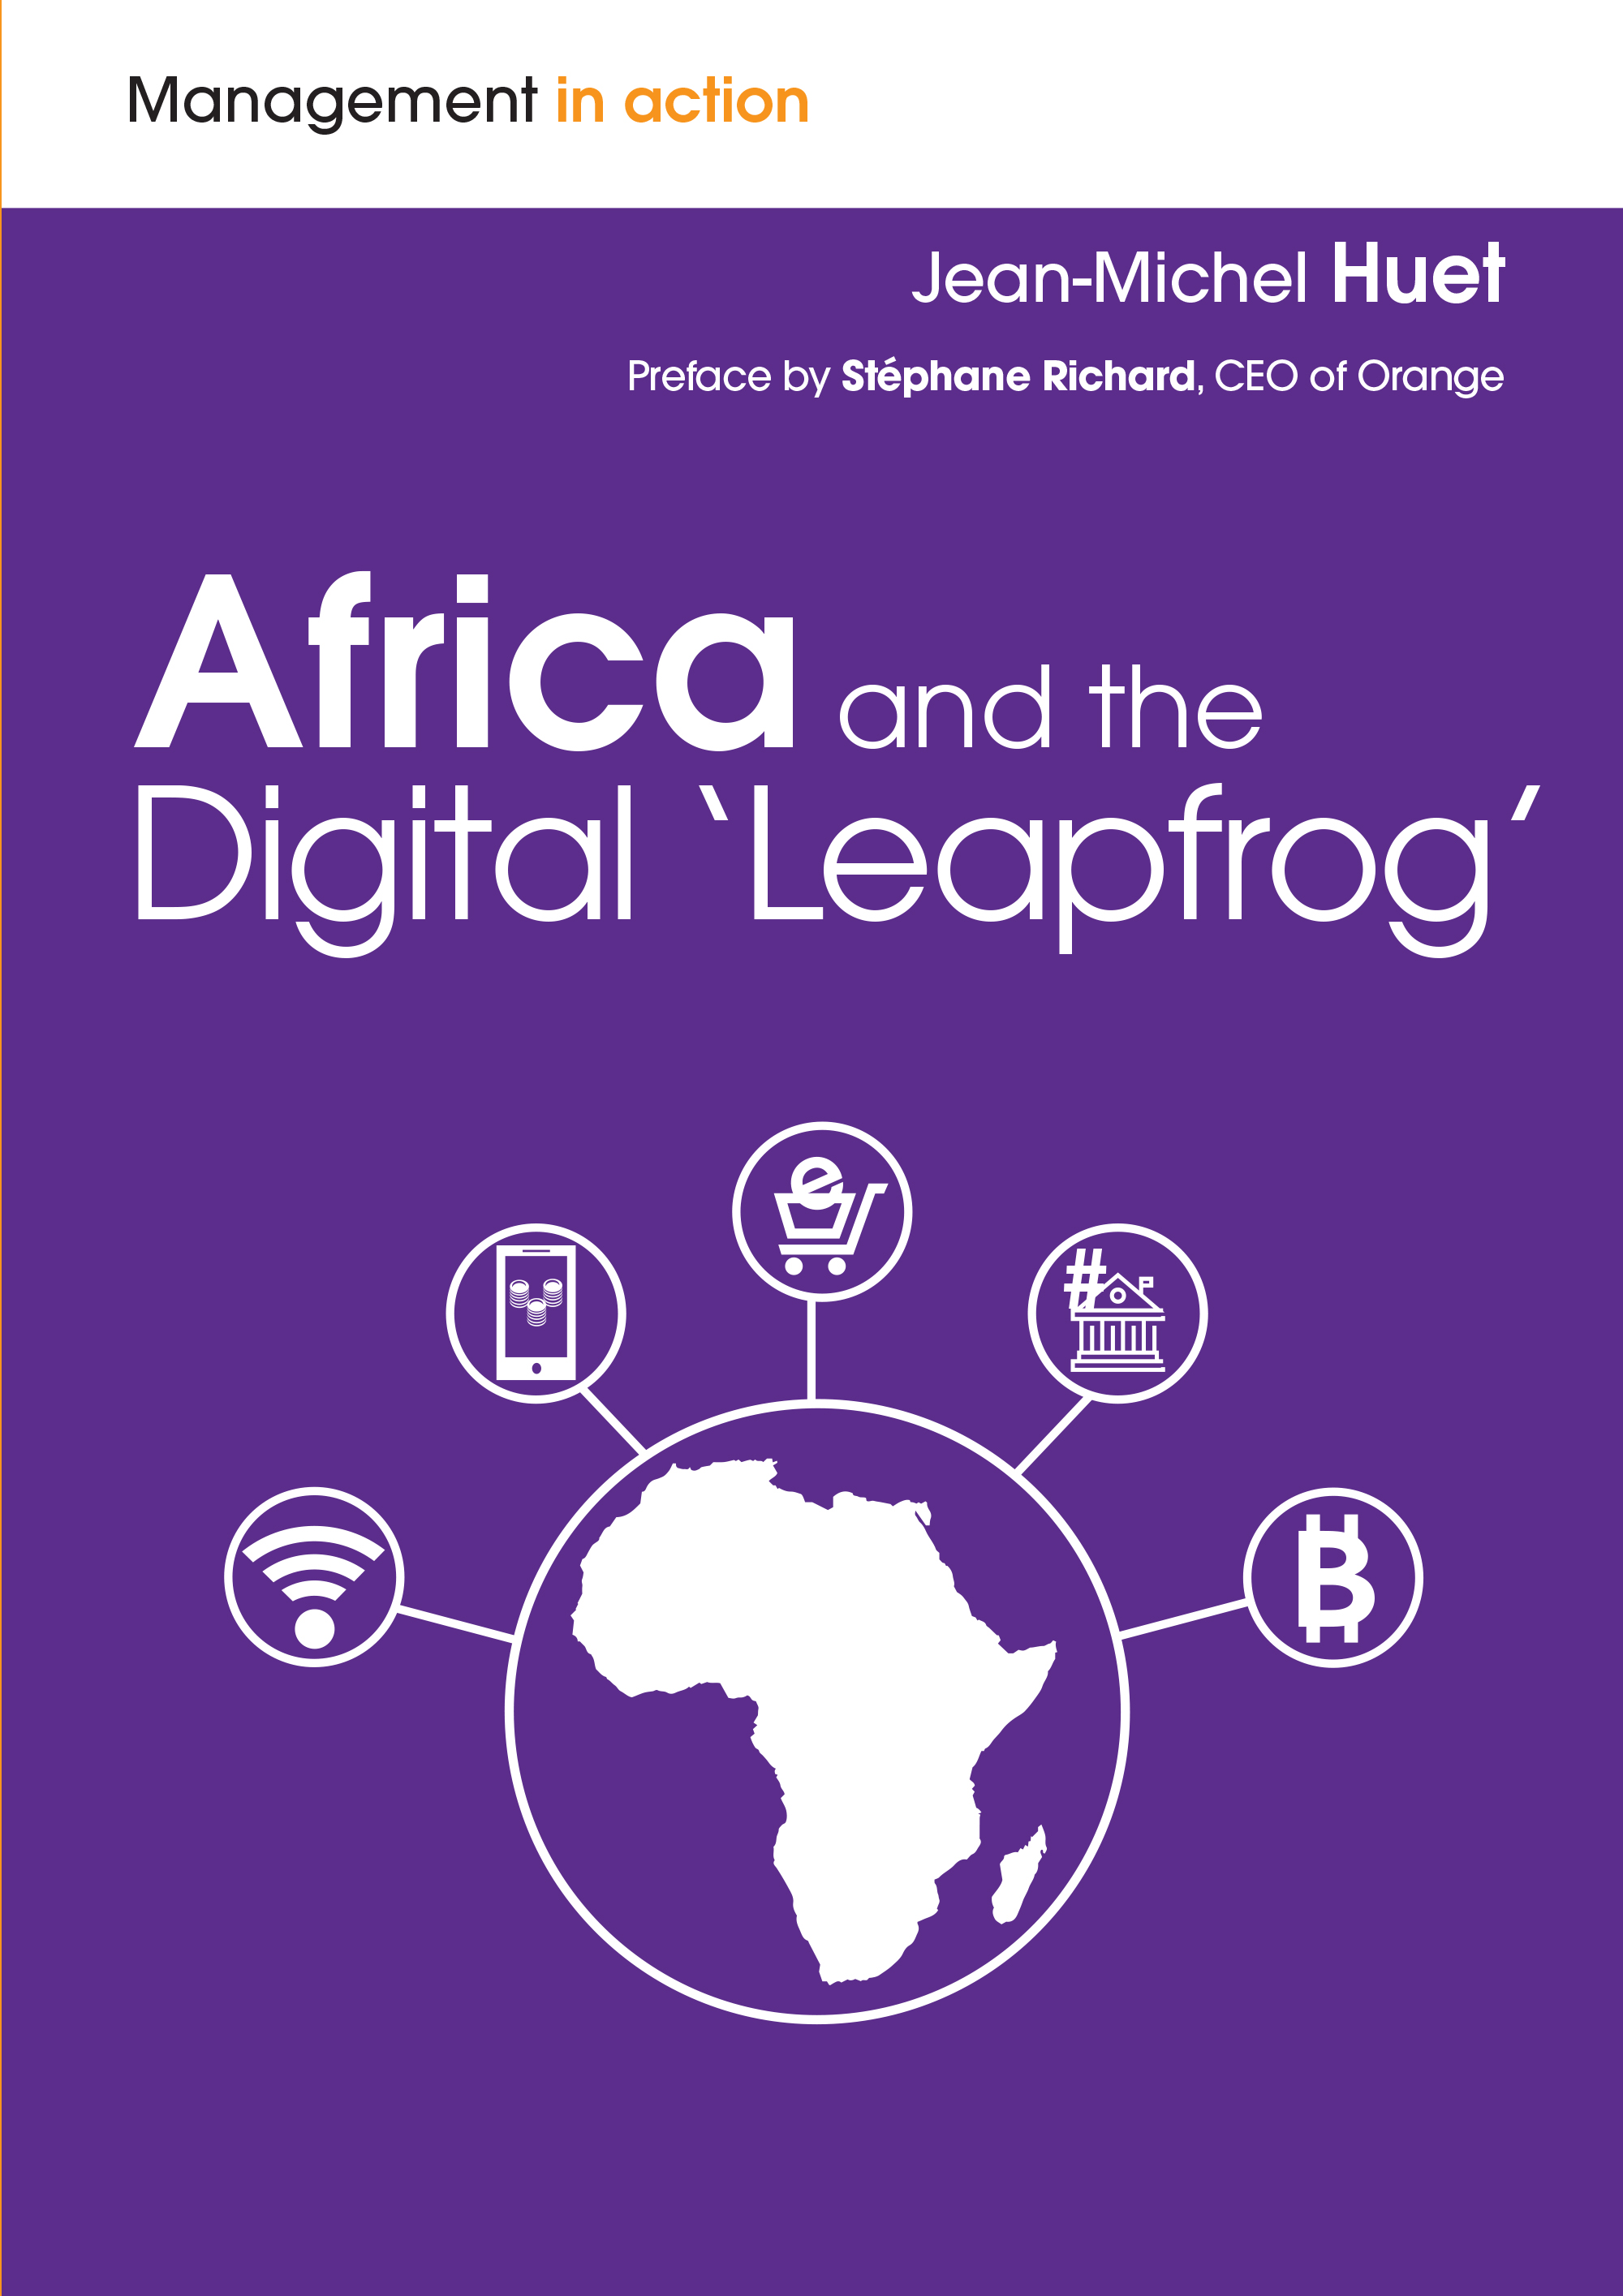 Africa and the Digital 'Leapfrog' - Jean-Michel Huet - Pearson